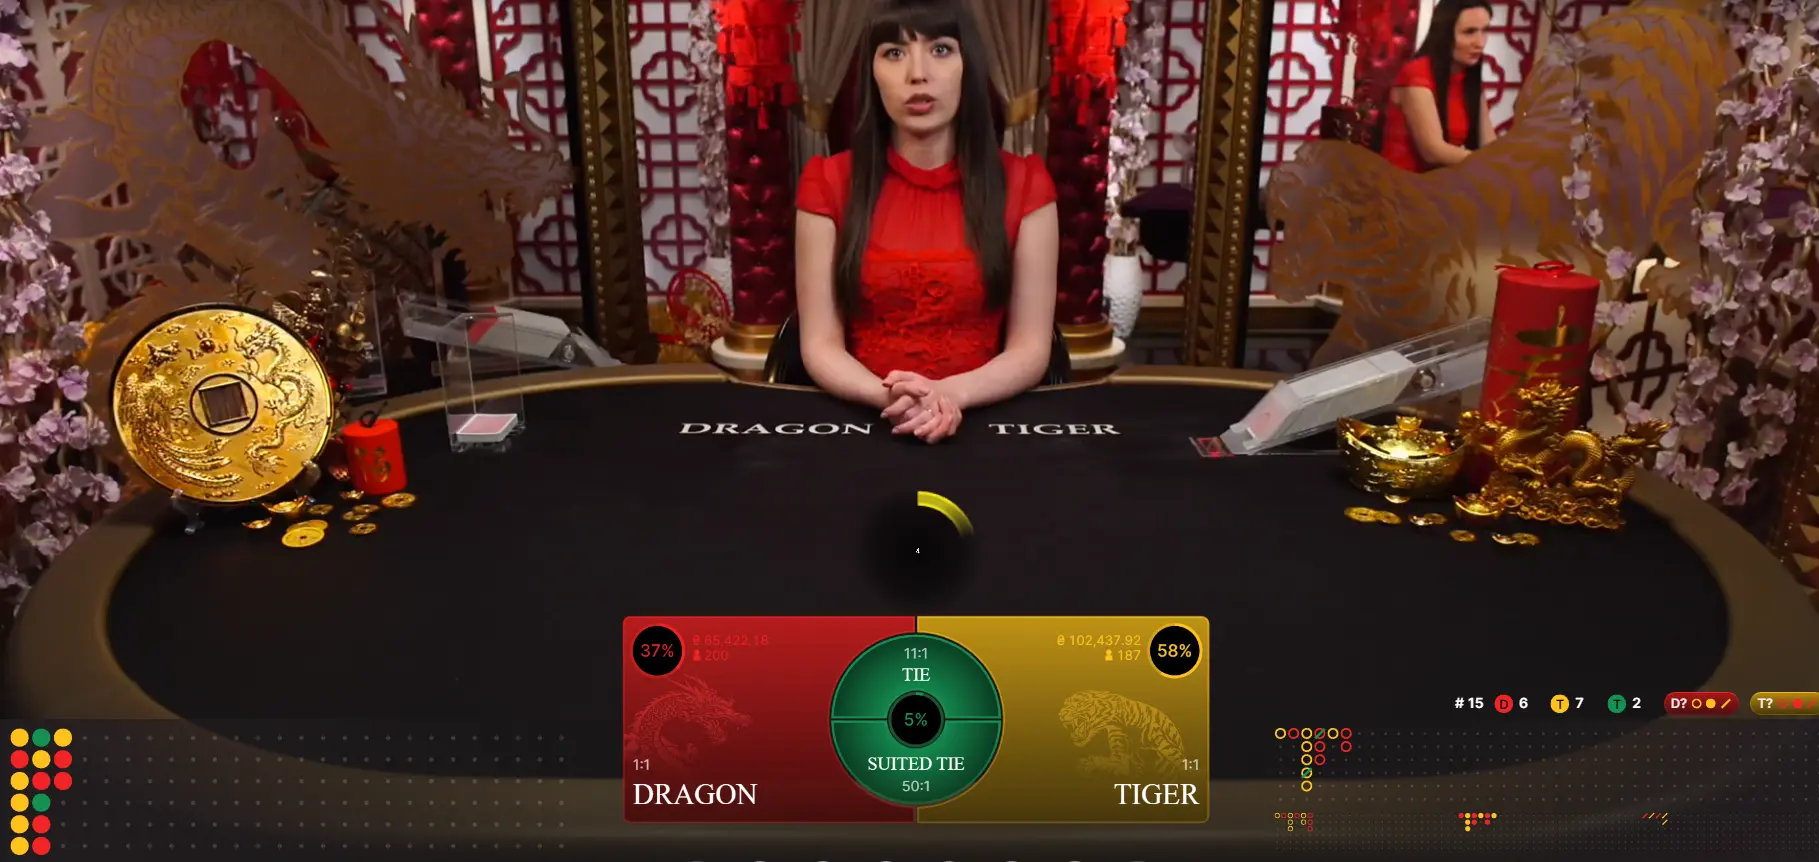 Dragon Tiger represents the latest addition to the vast lineup of casino card offerings